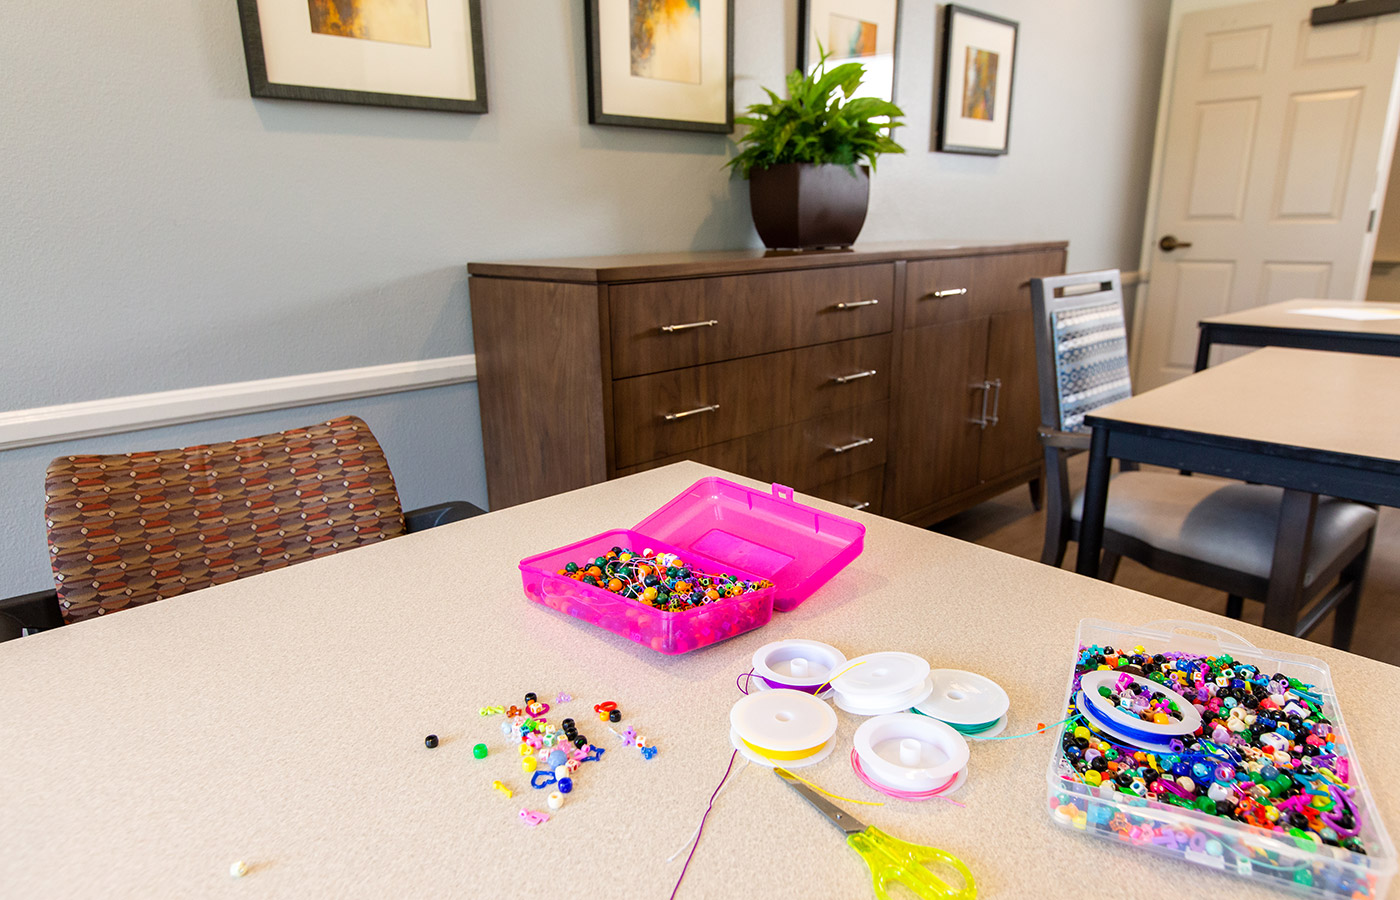 Beading materials are on a table at Whittier Place.